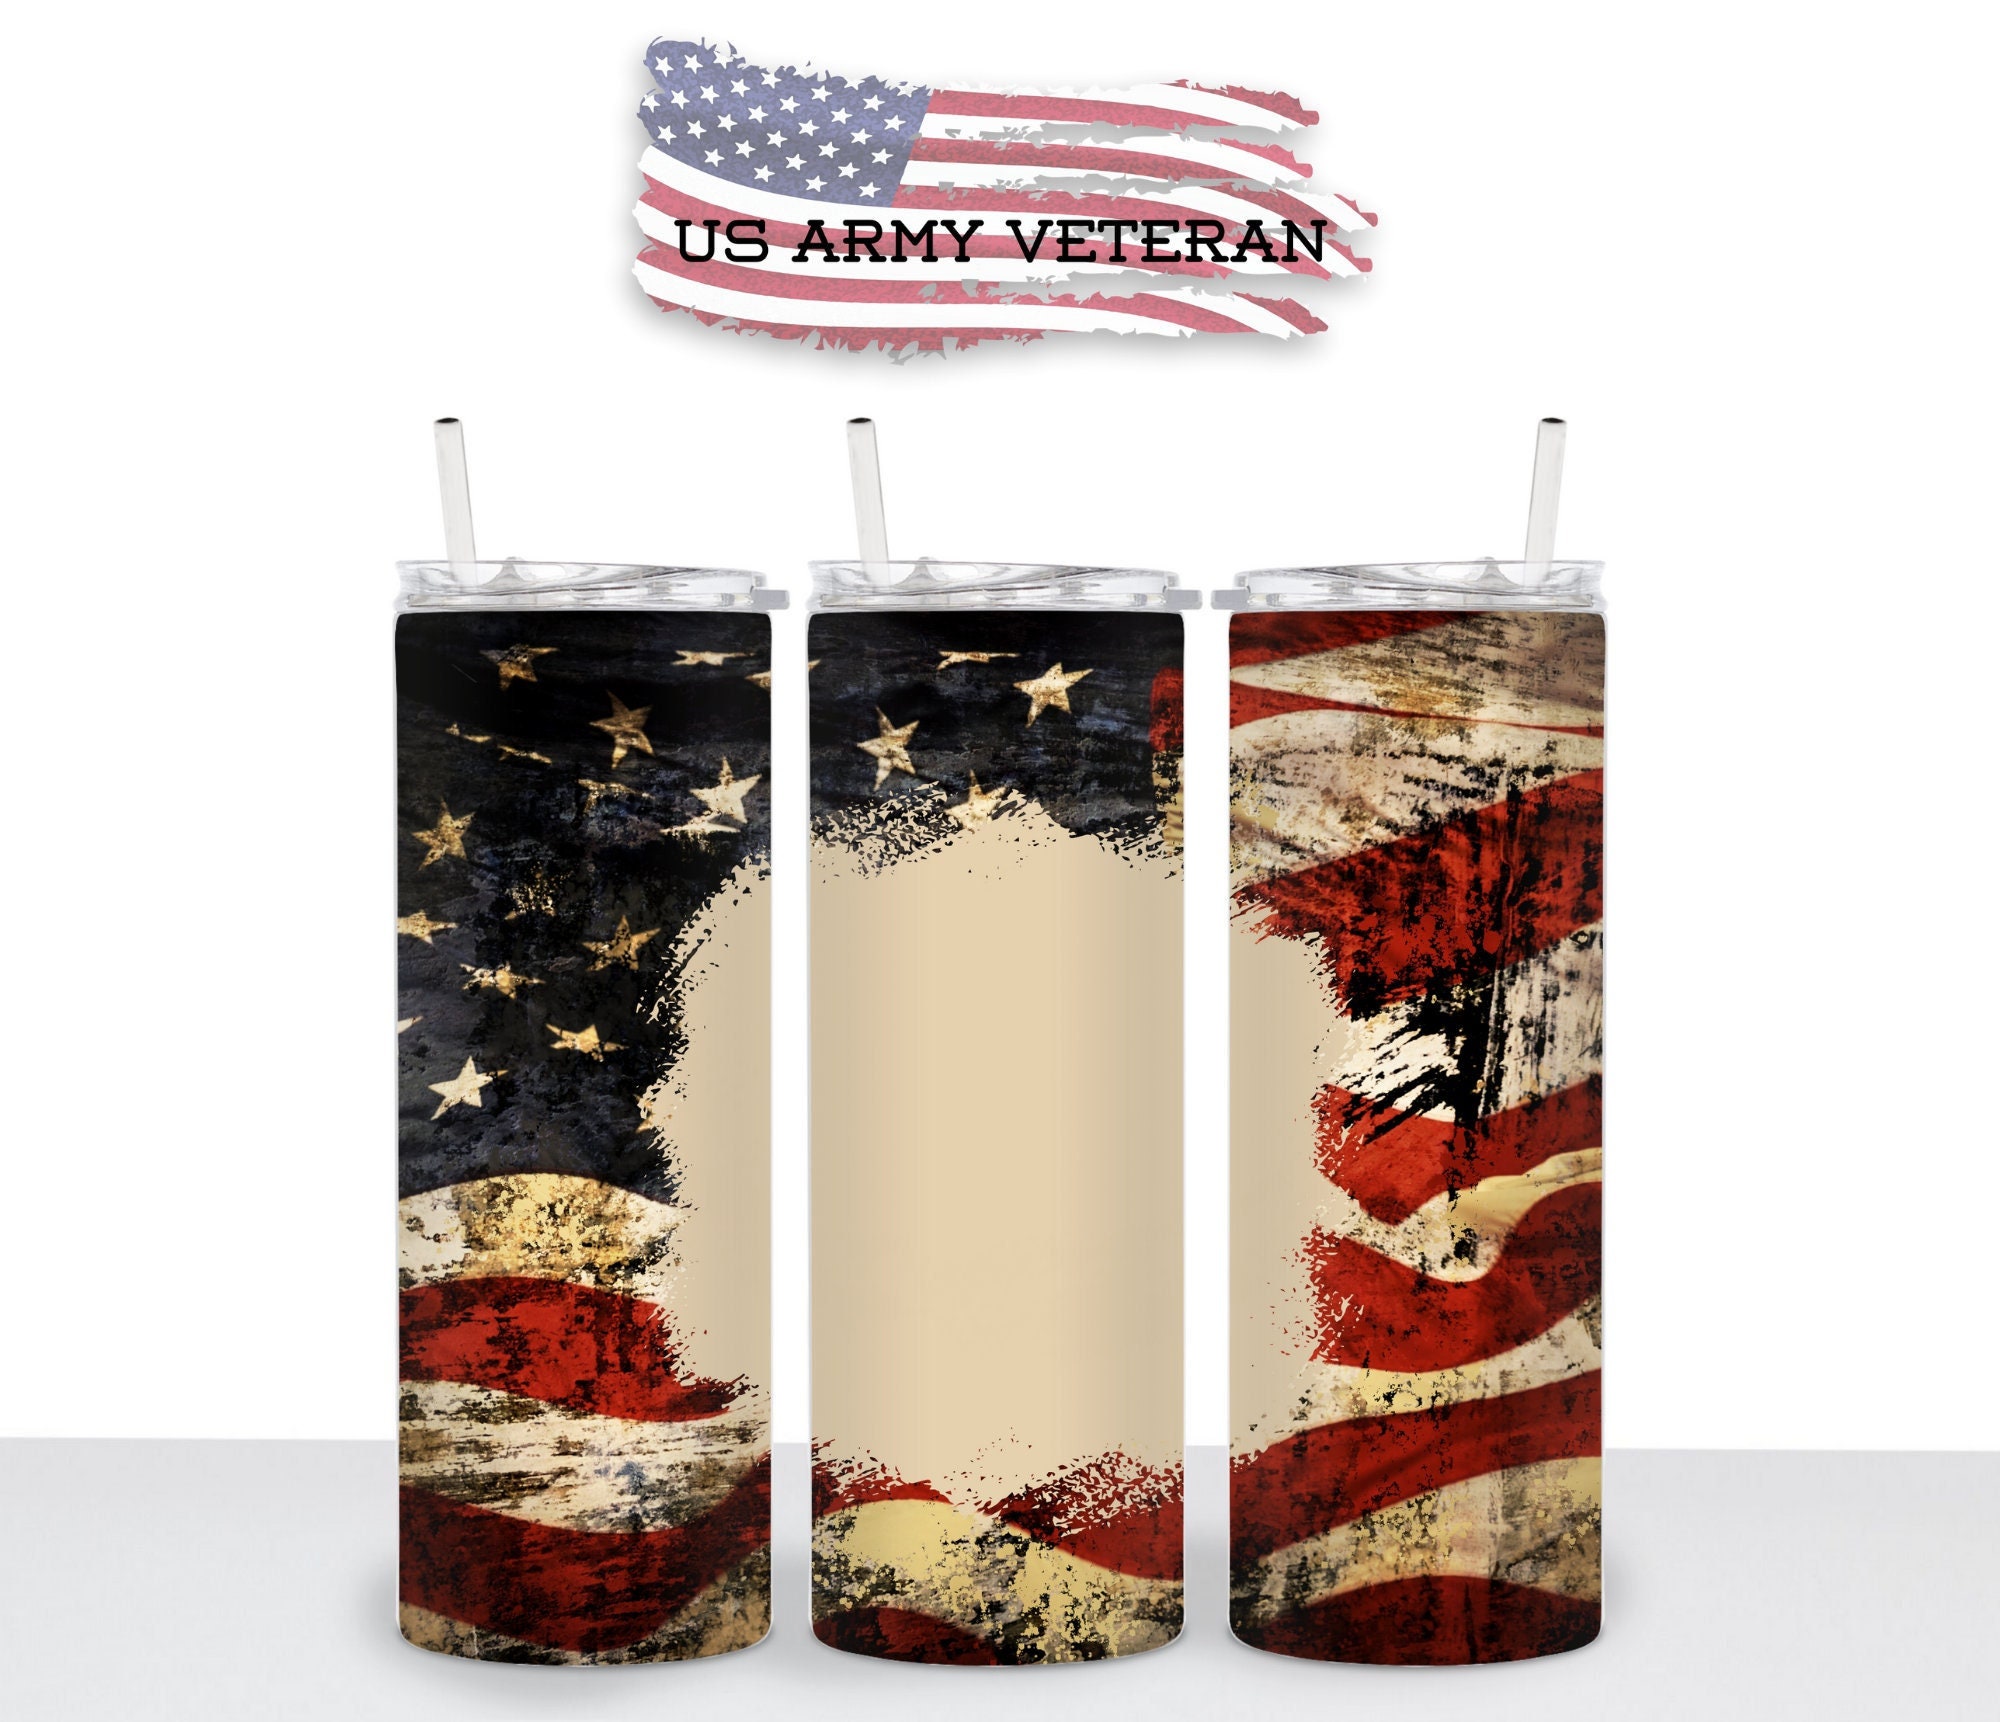 Men's 4th of July tumbler, We the people, Home of the brave, USA